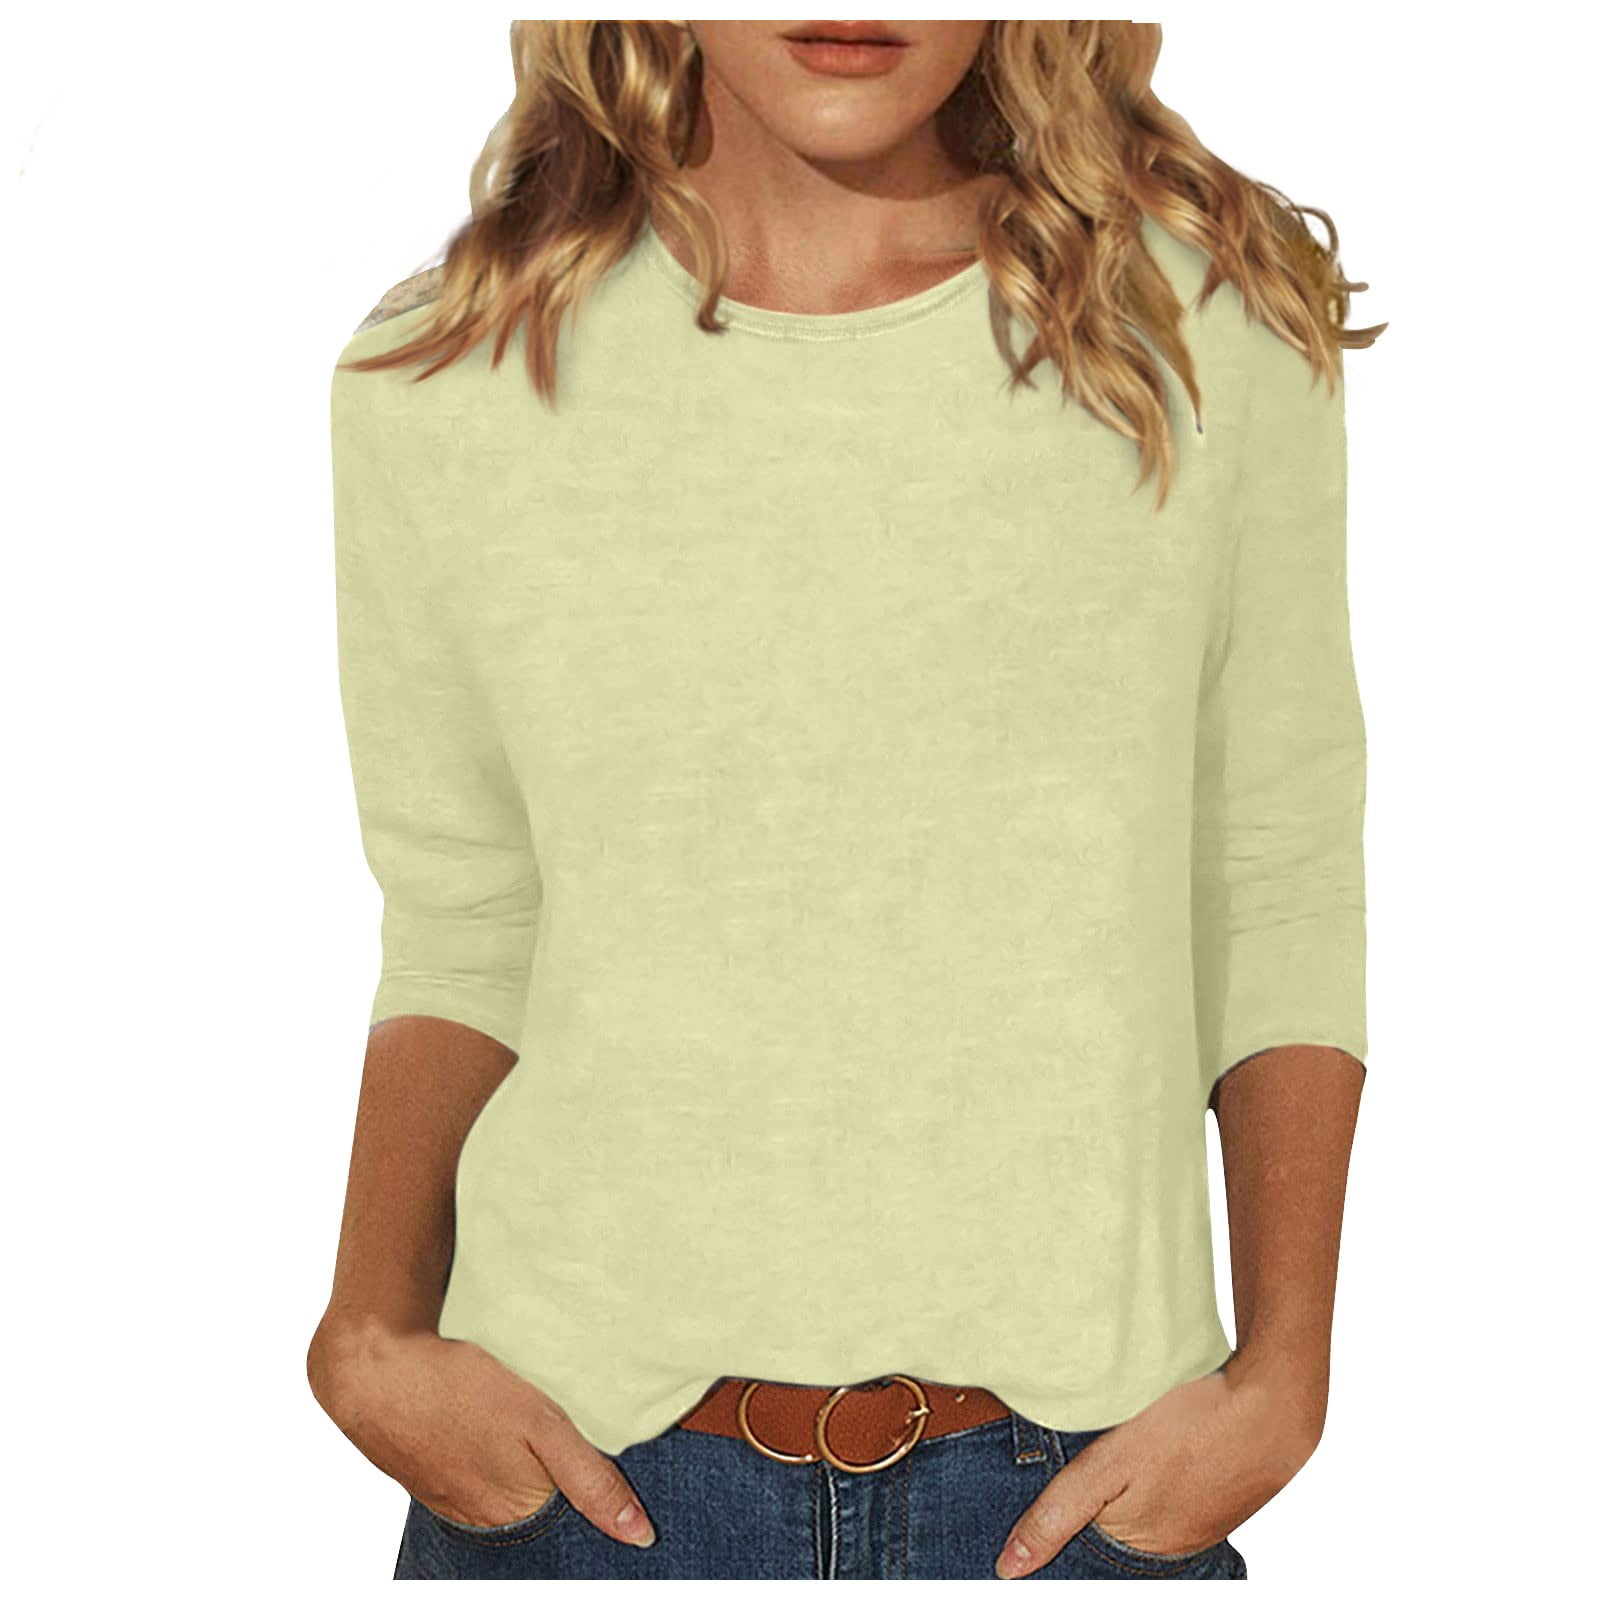 XDDLITP 3/4 Sleeve Shirts for Women Loose Fit Crewneck Dressy Casual Tops  Lightweight Solid Color Comfy Cute T Shirts Beige XL